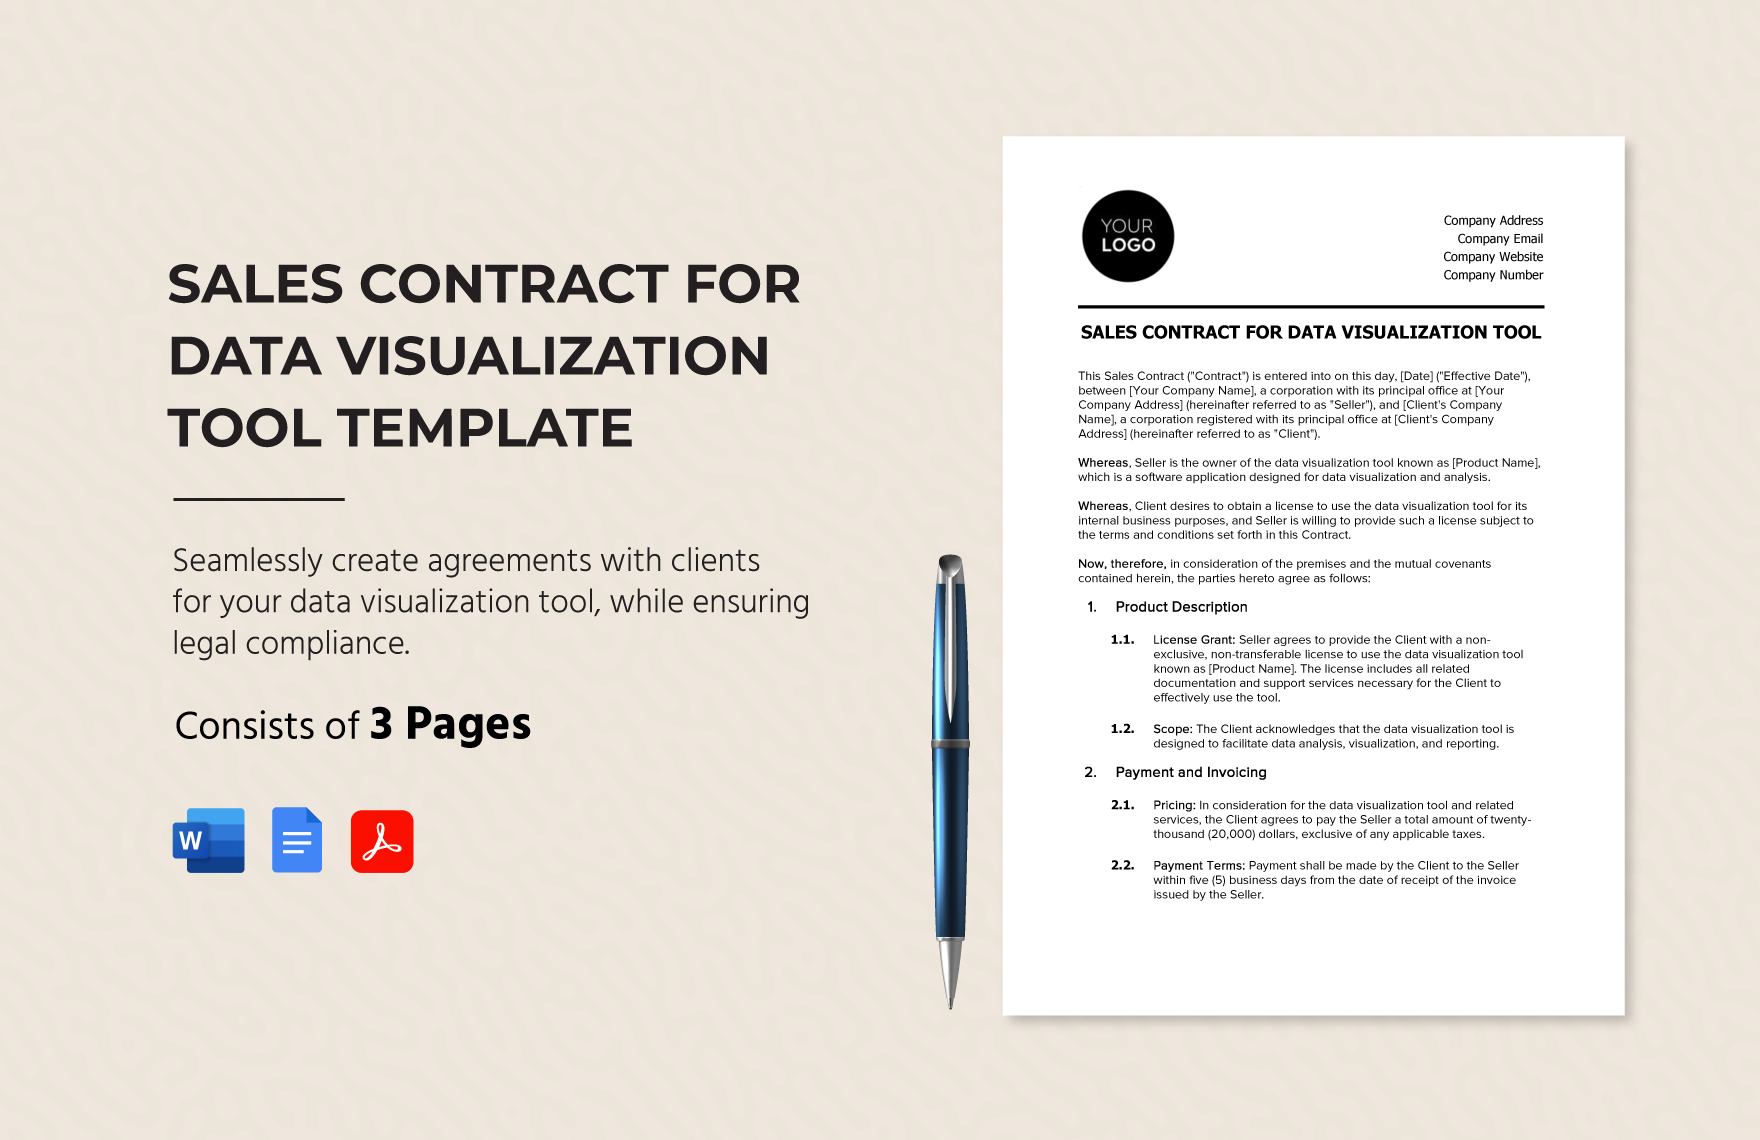 Sales Contract for Data Visualization Tool Template in Word, Google Docs, PDF